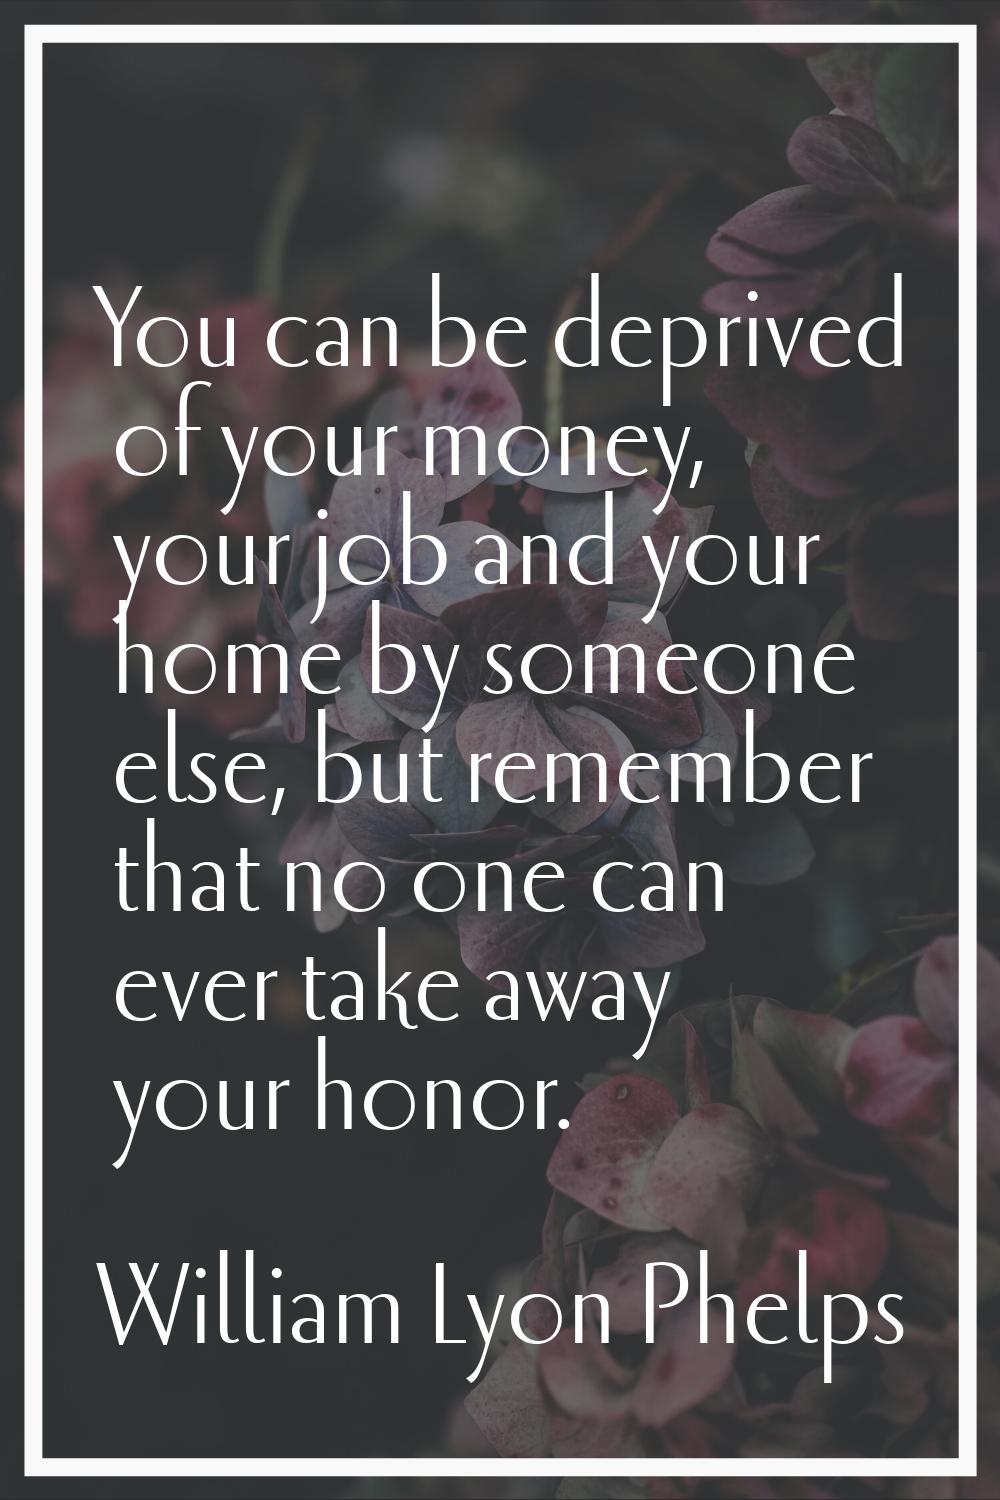 You can be deprived of your money, your job and your home by someone else, but remember that no one